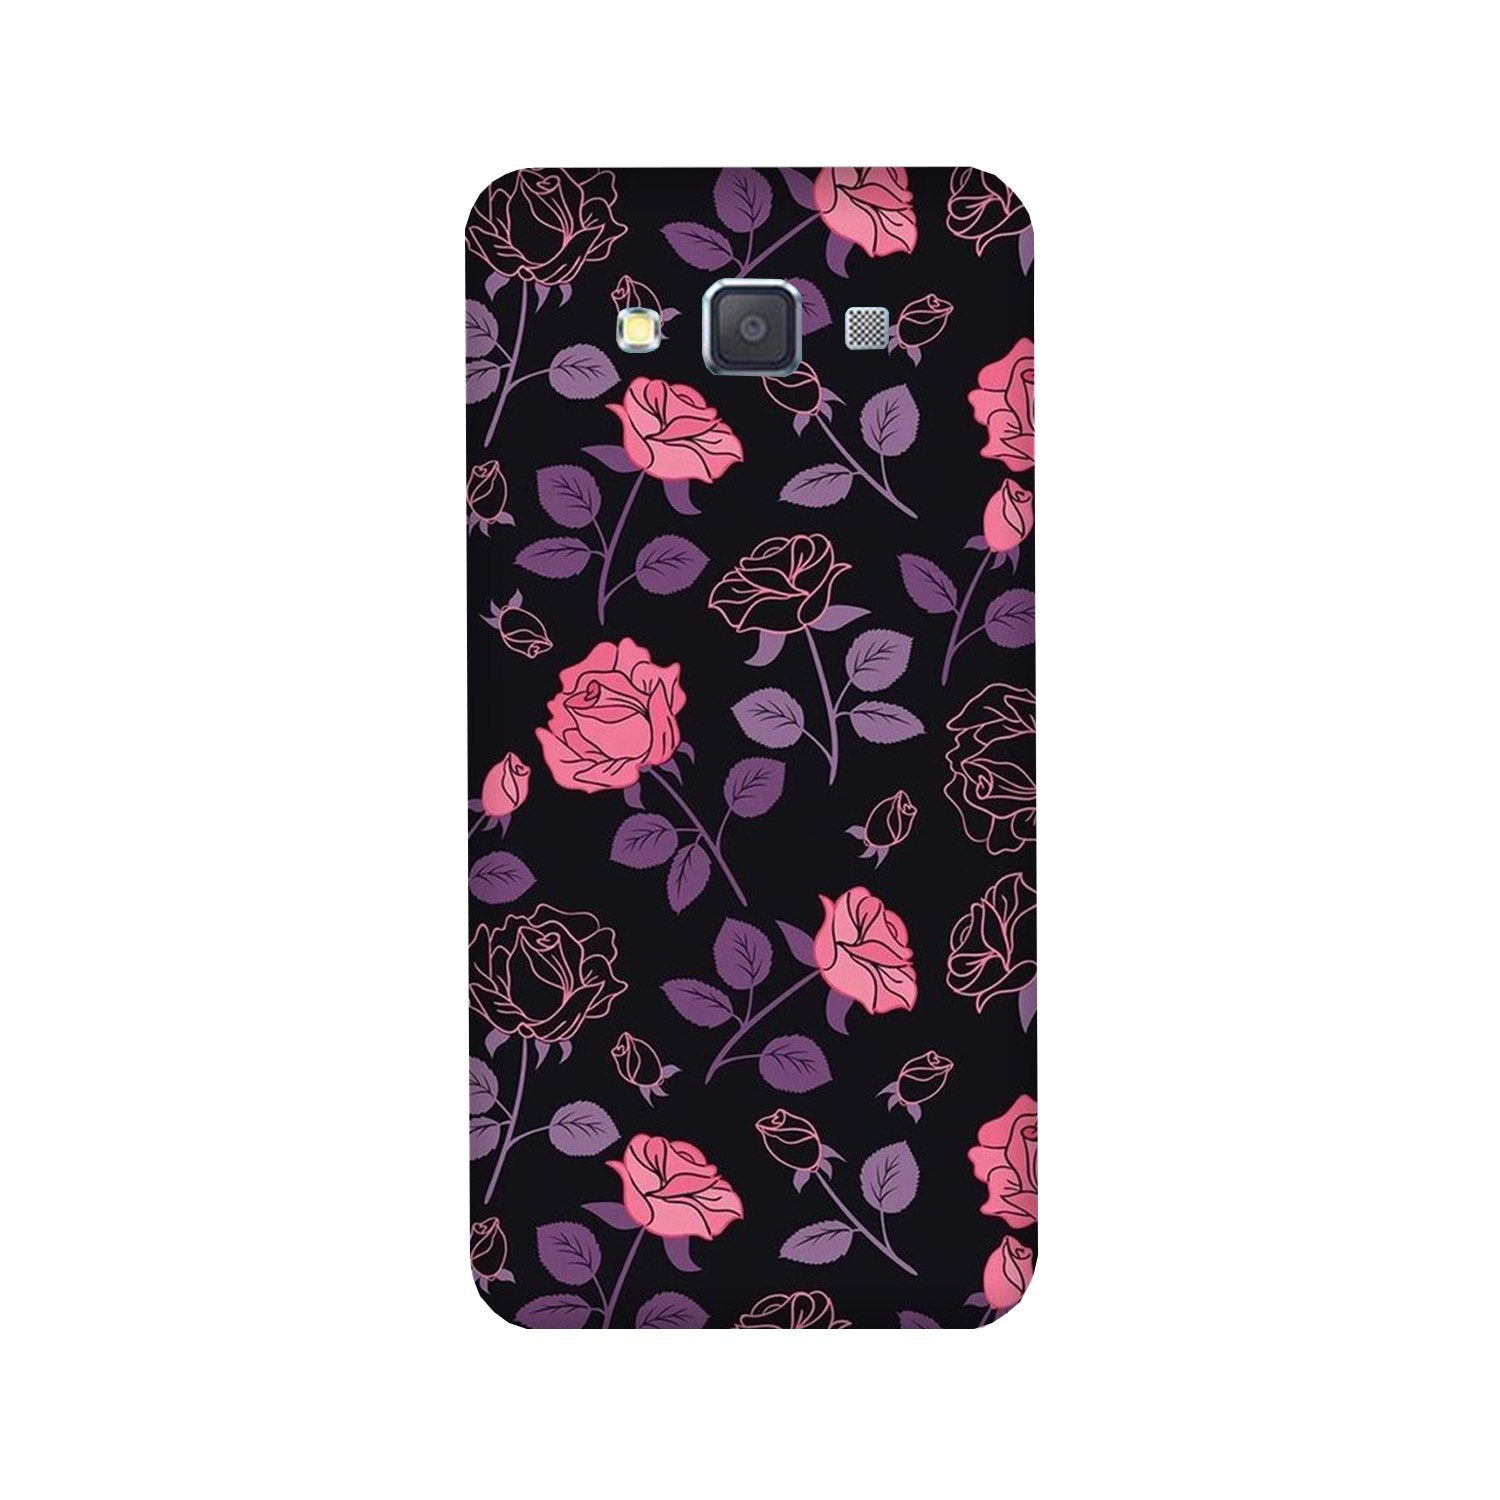 Rose Black Background Case for Galaxy J7 (2016)